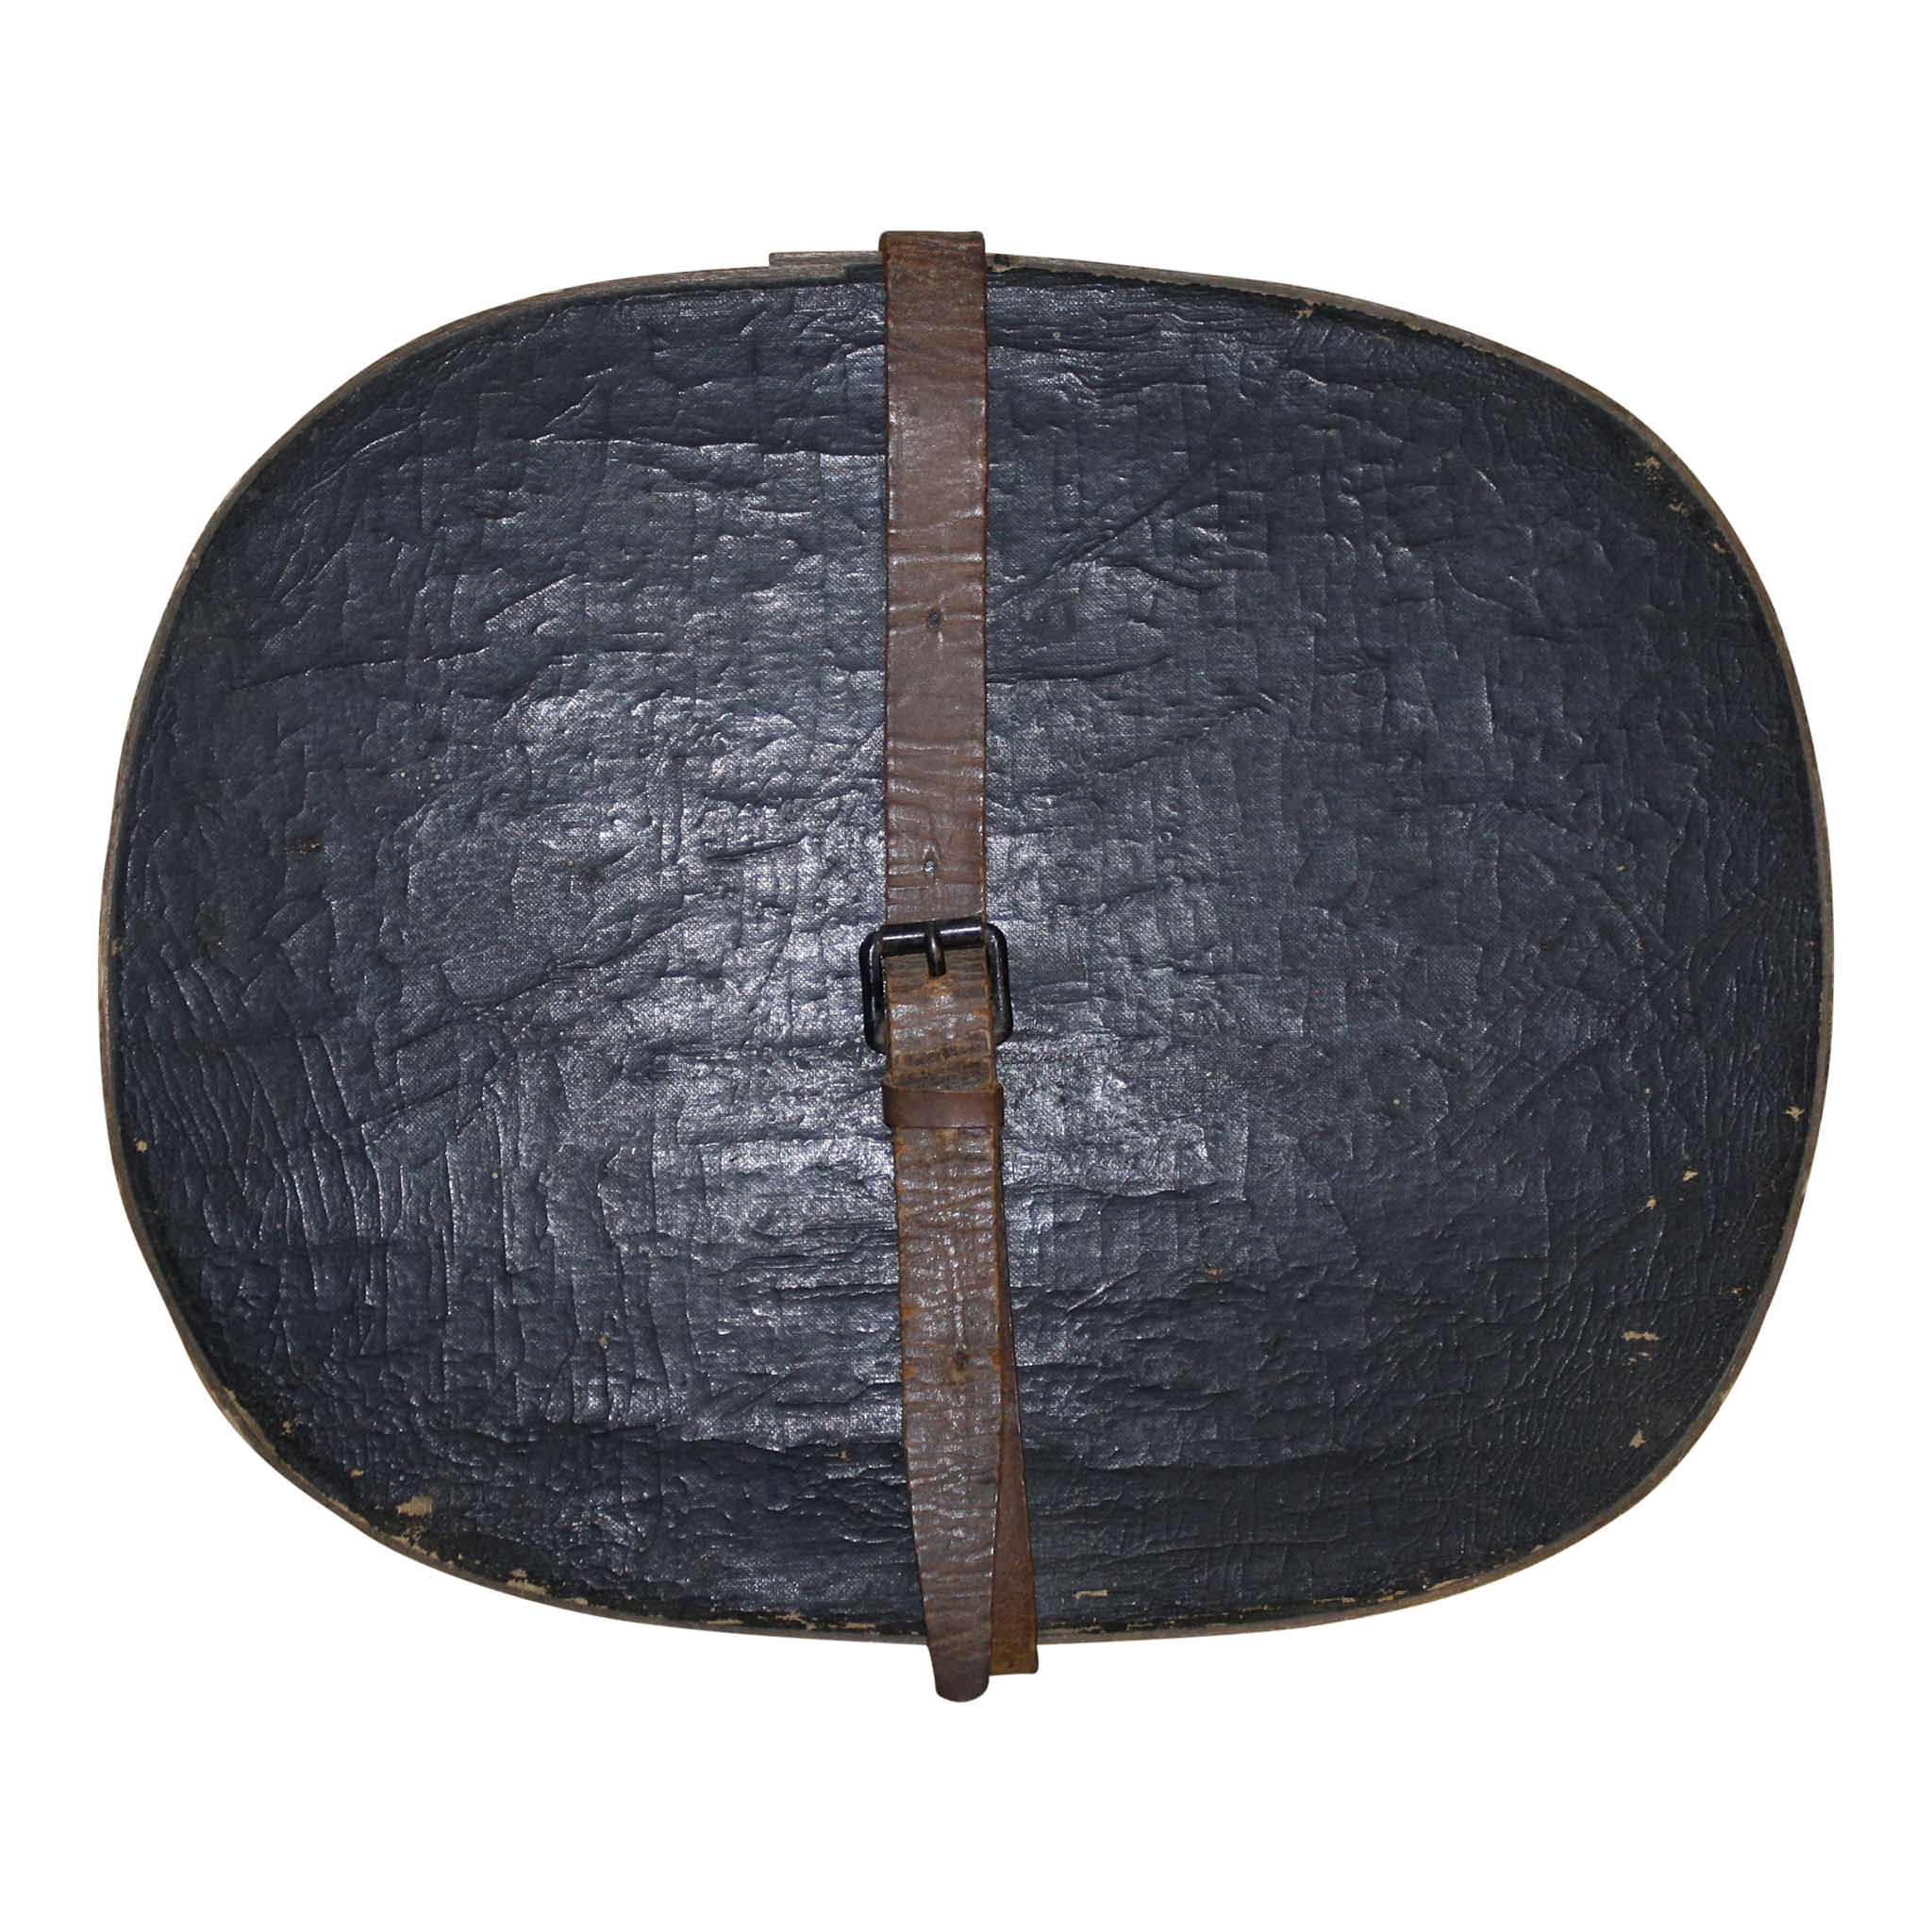 Oval Bentwood Hat Box with Leather Strap and Lid